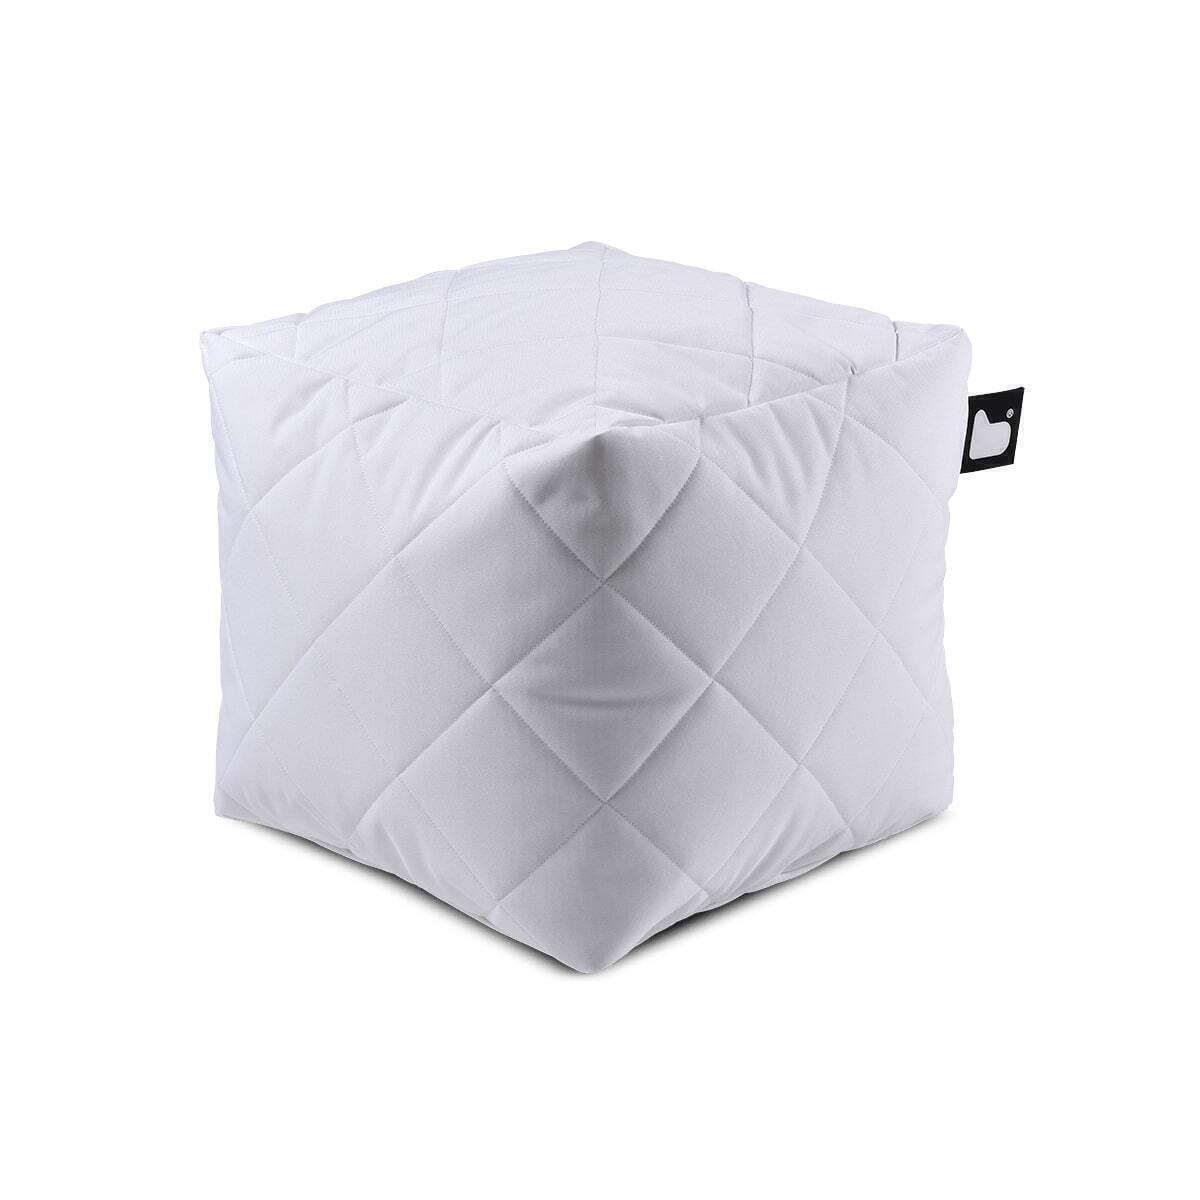 Extreme Lounging - Quilted Bean Box  - White product image